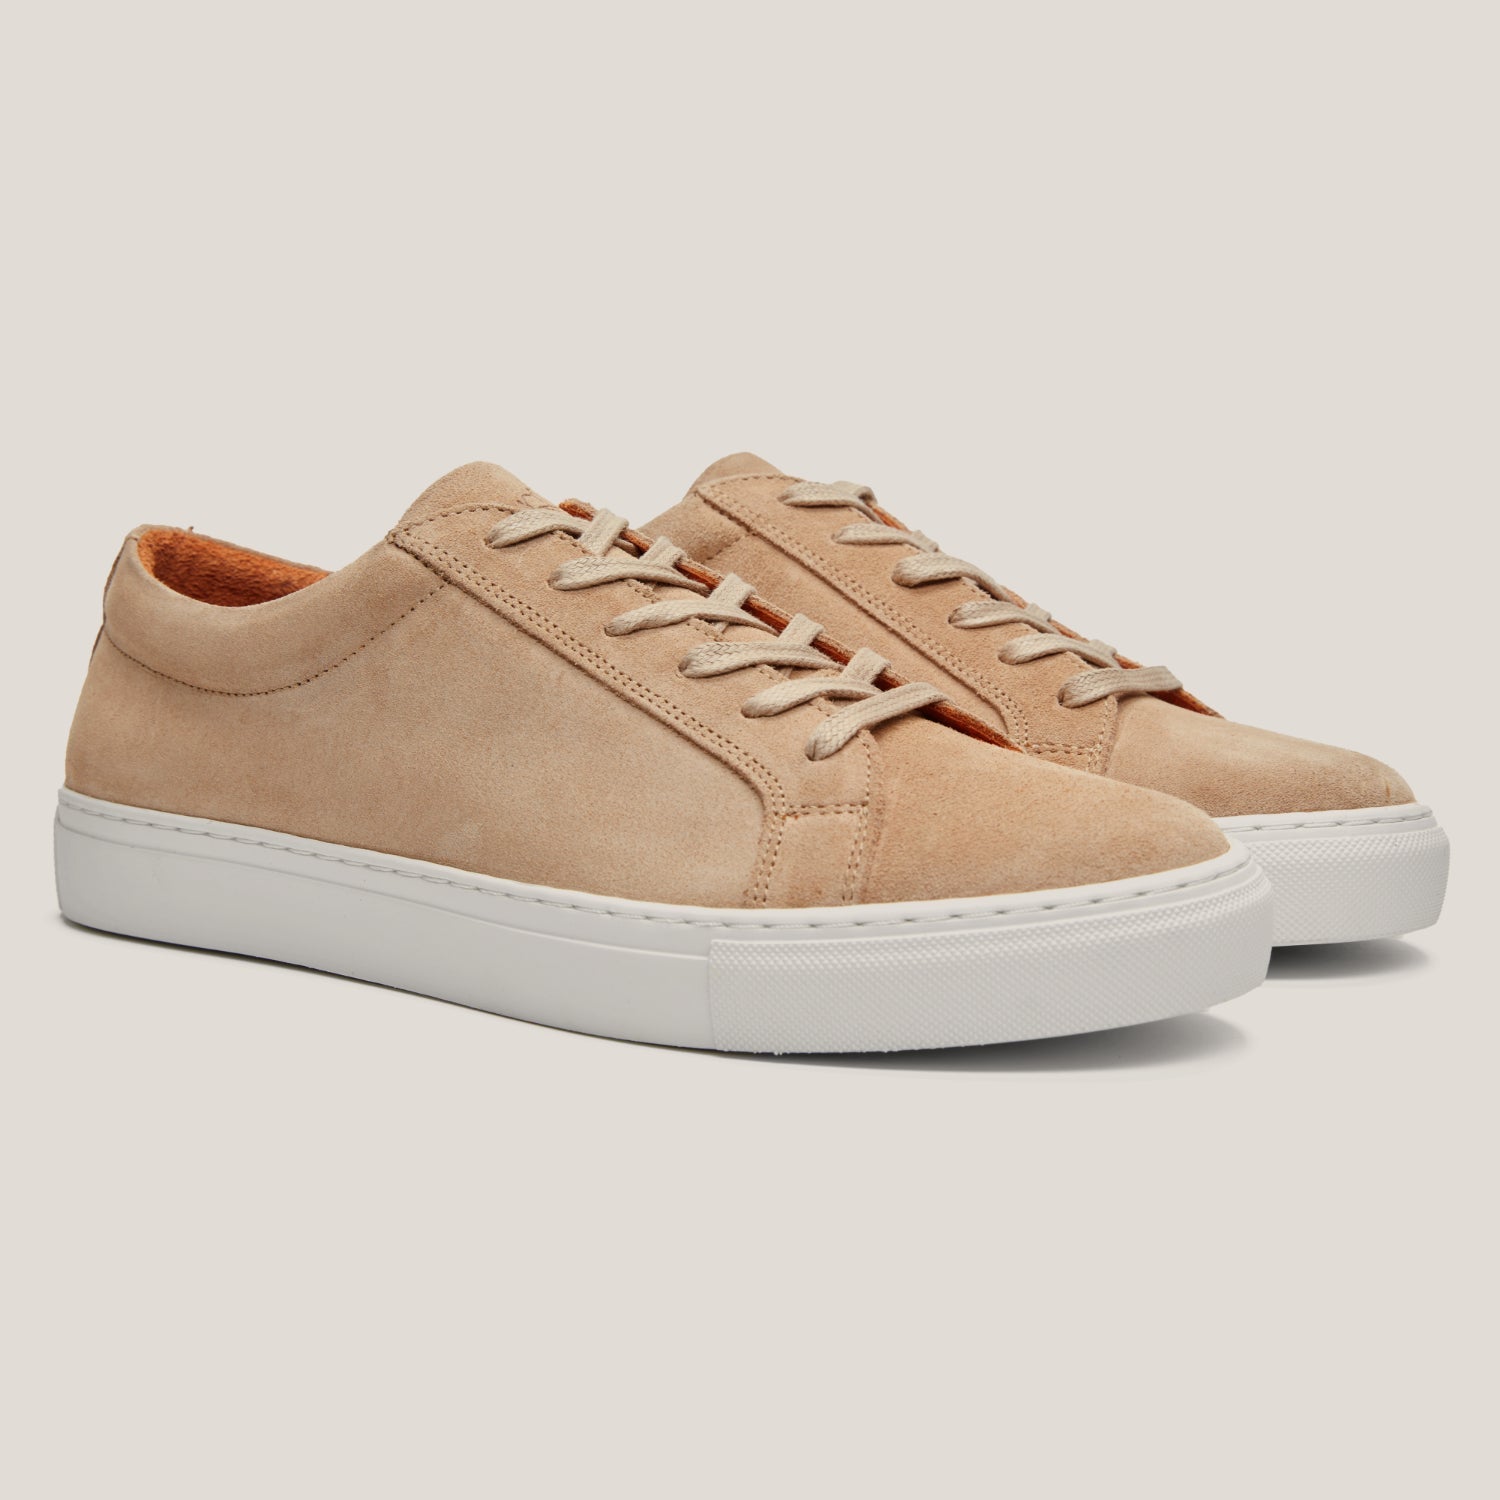 Baltimore Cappuccino Suede - Reinhard Frans - Sneakers